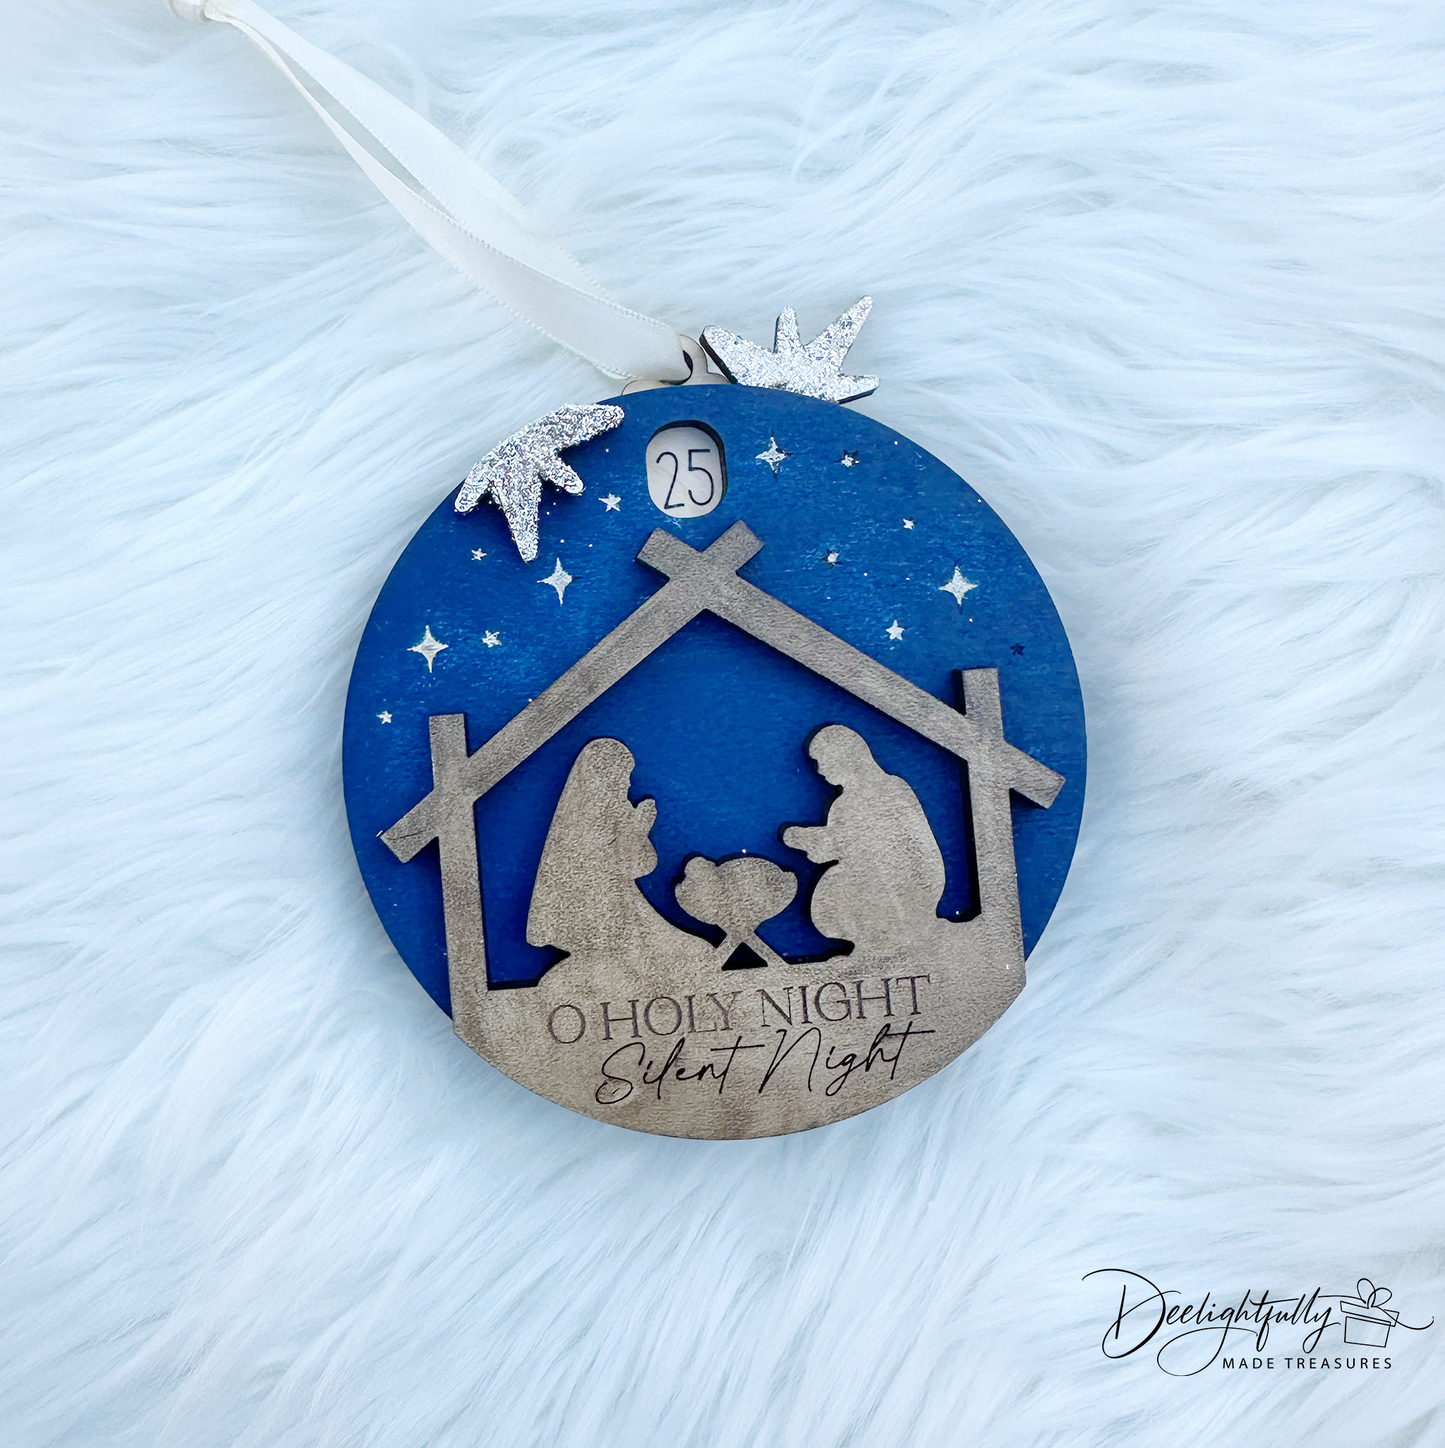 Engraved O Holy Night Silent Night Wooden Christmas Nativity Countdown ornament on a white background